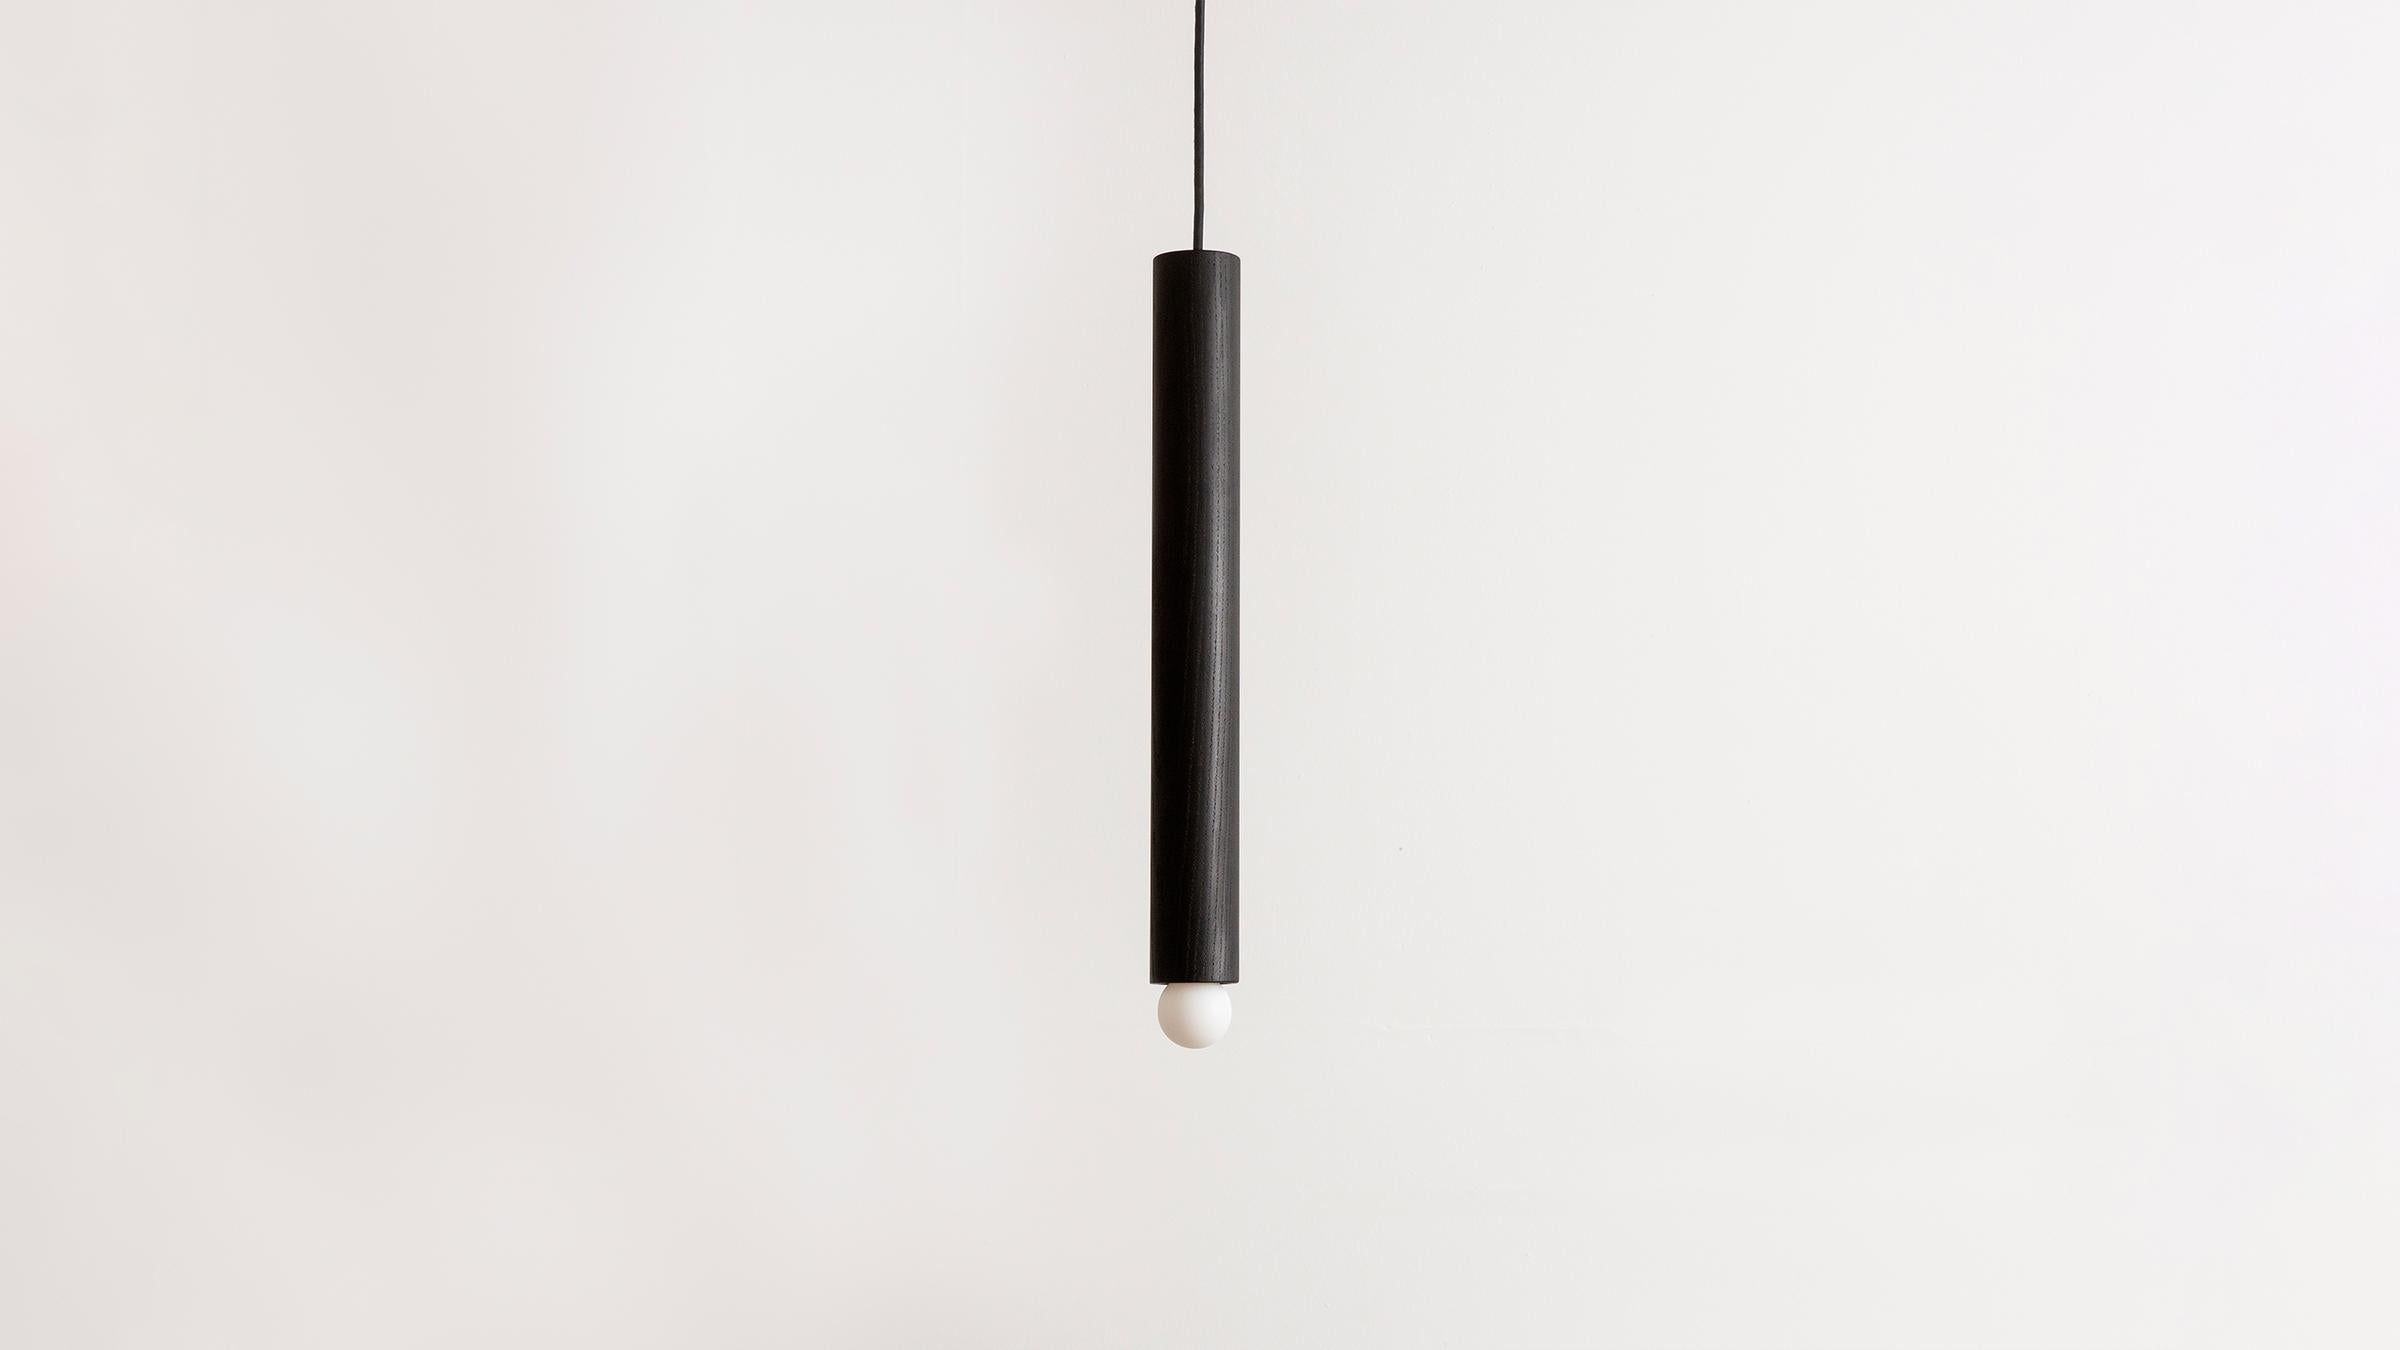 The Lodge cord pendant large is crafted from a hand-turned oak dowel in our linear length. Suspended from a cloth cord, the wooden dowel is a tactile armature punctuated by a single glowing bulb. Available in natural oak or oxidized ash with hewn